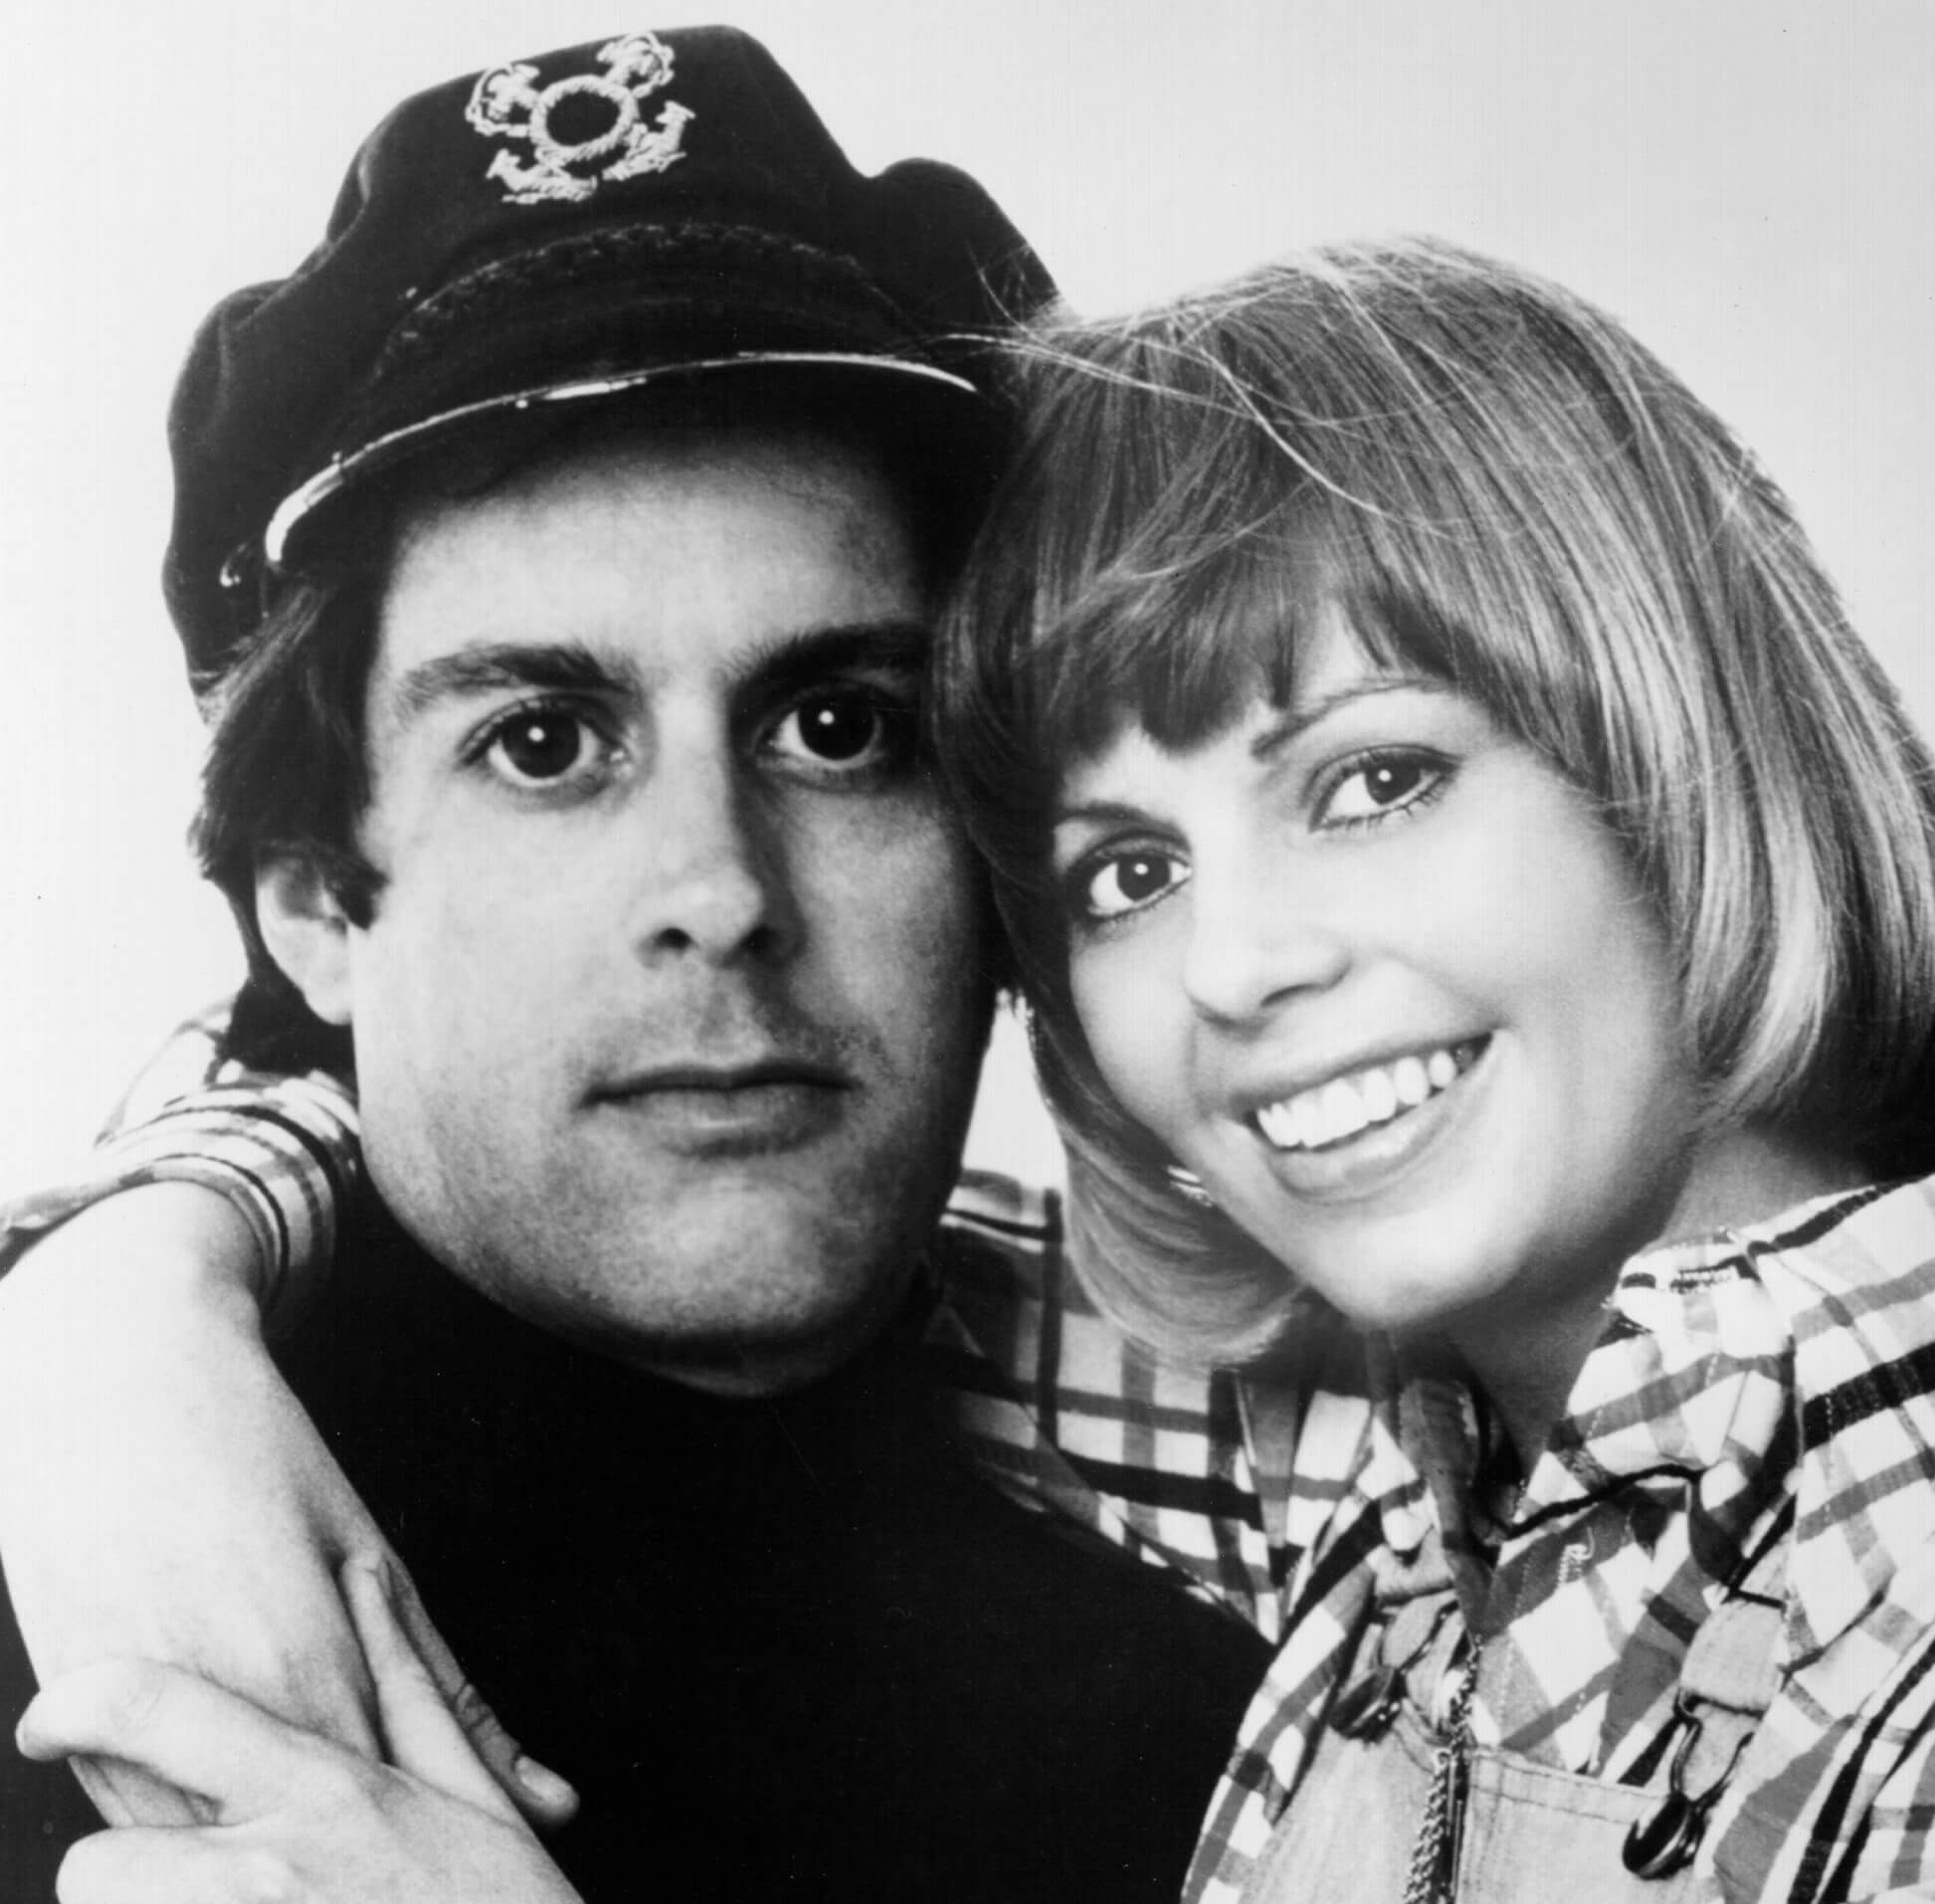 The Captain & Tennille in black-and-white